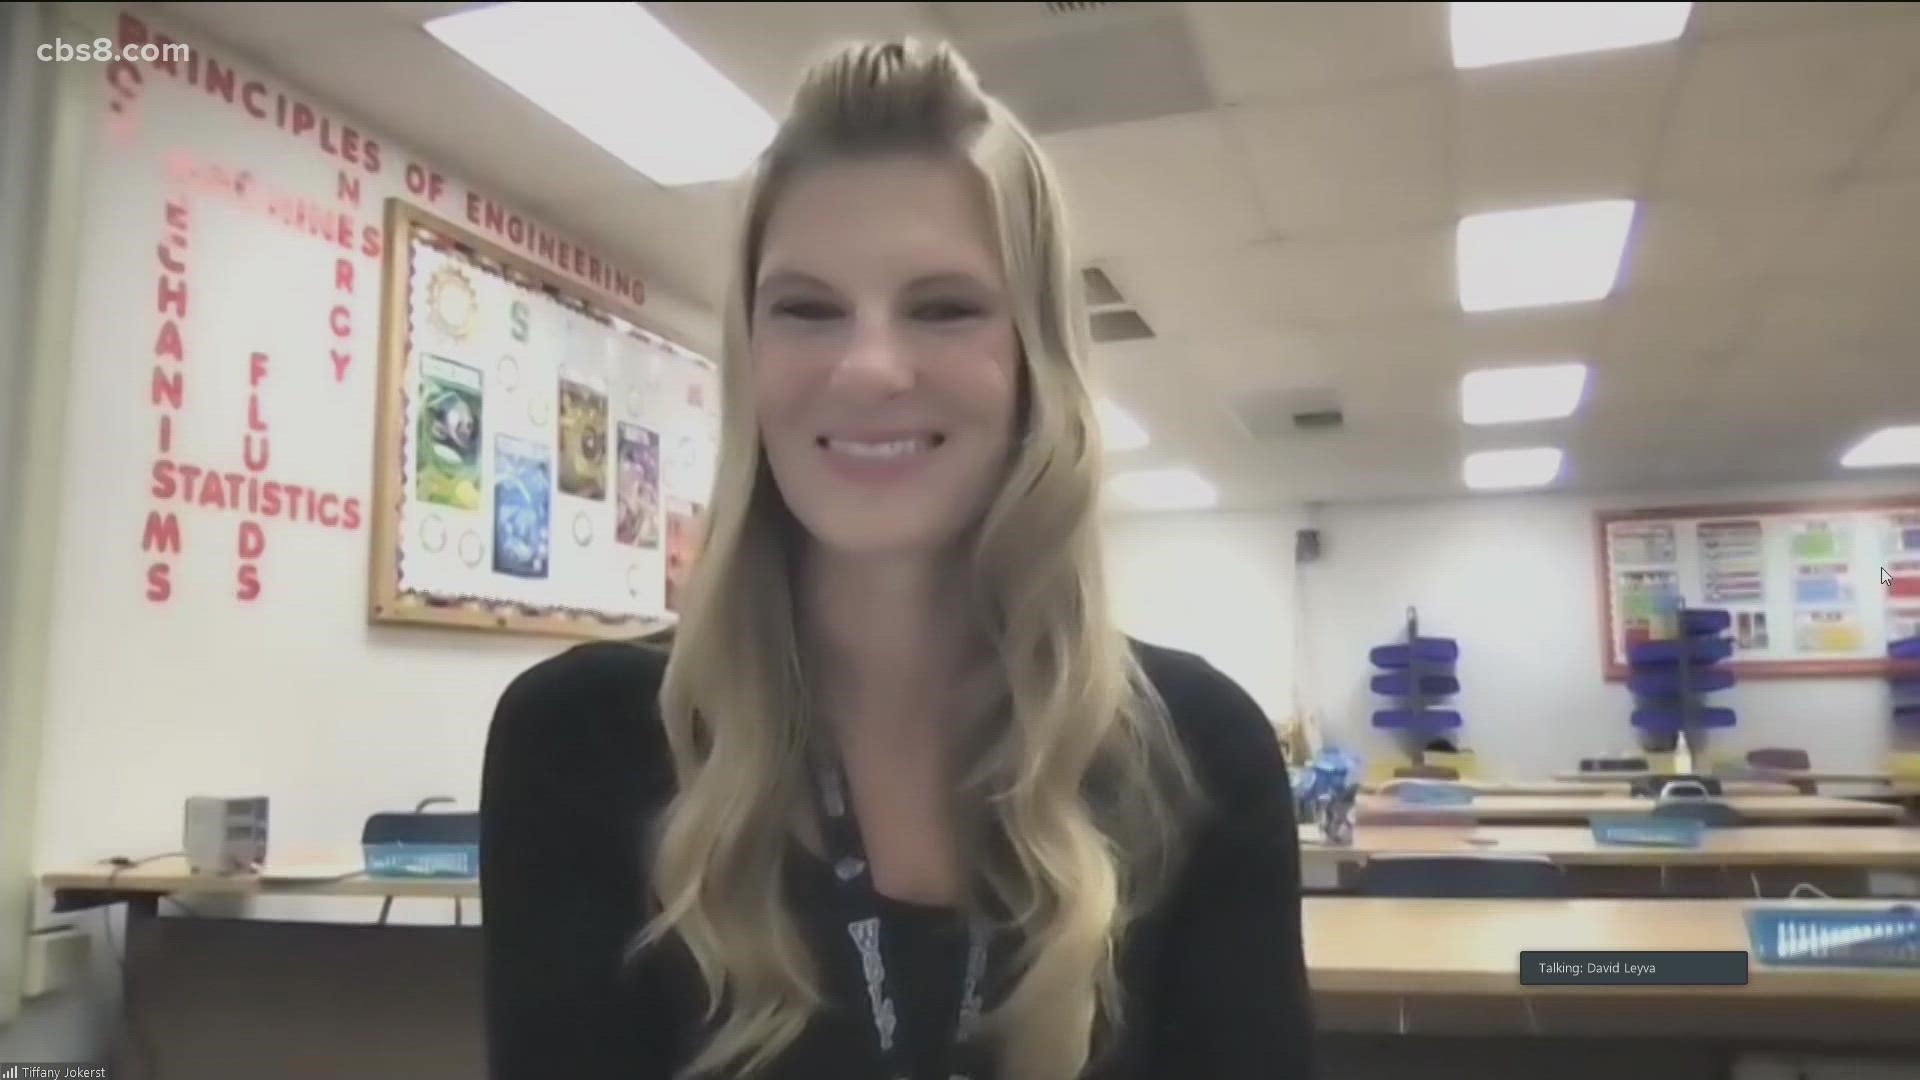 2022 California Teacher of the Year, Tiffany Jokerst joined Morning Extra to talk about what it means to win the award and her class at West Hills High School.